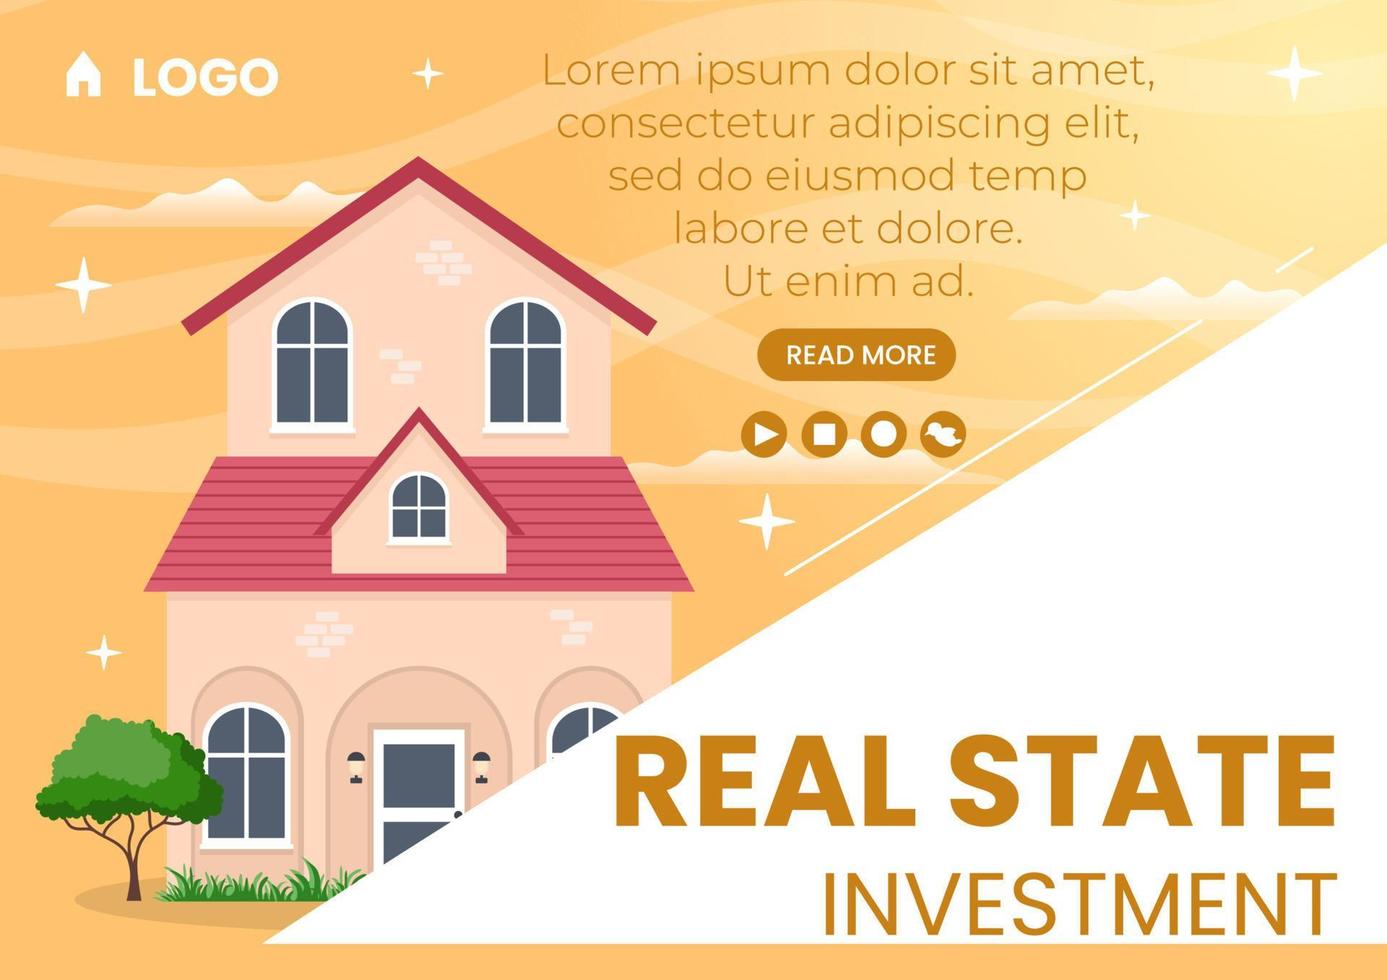 Real Estate Investment Brochure Template Flat Design Illustration Editable of Square Background Suitable for Social media, Greeting Card and Web Internet Ads vector